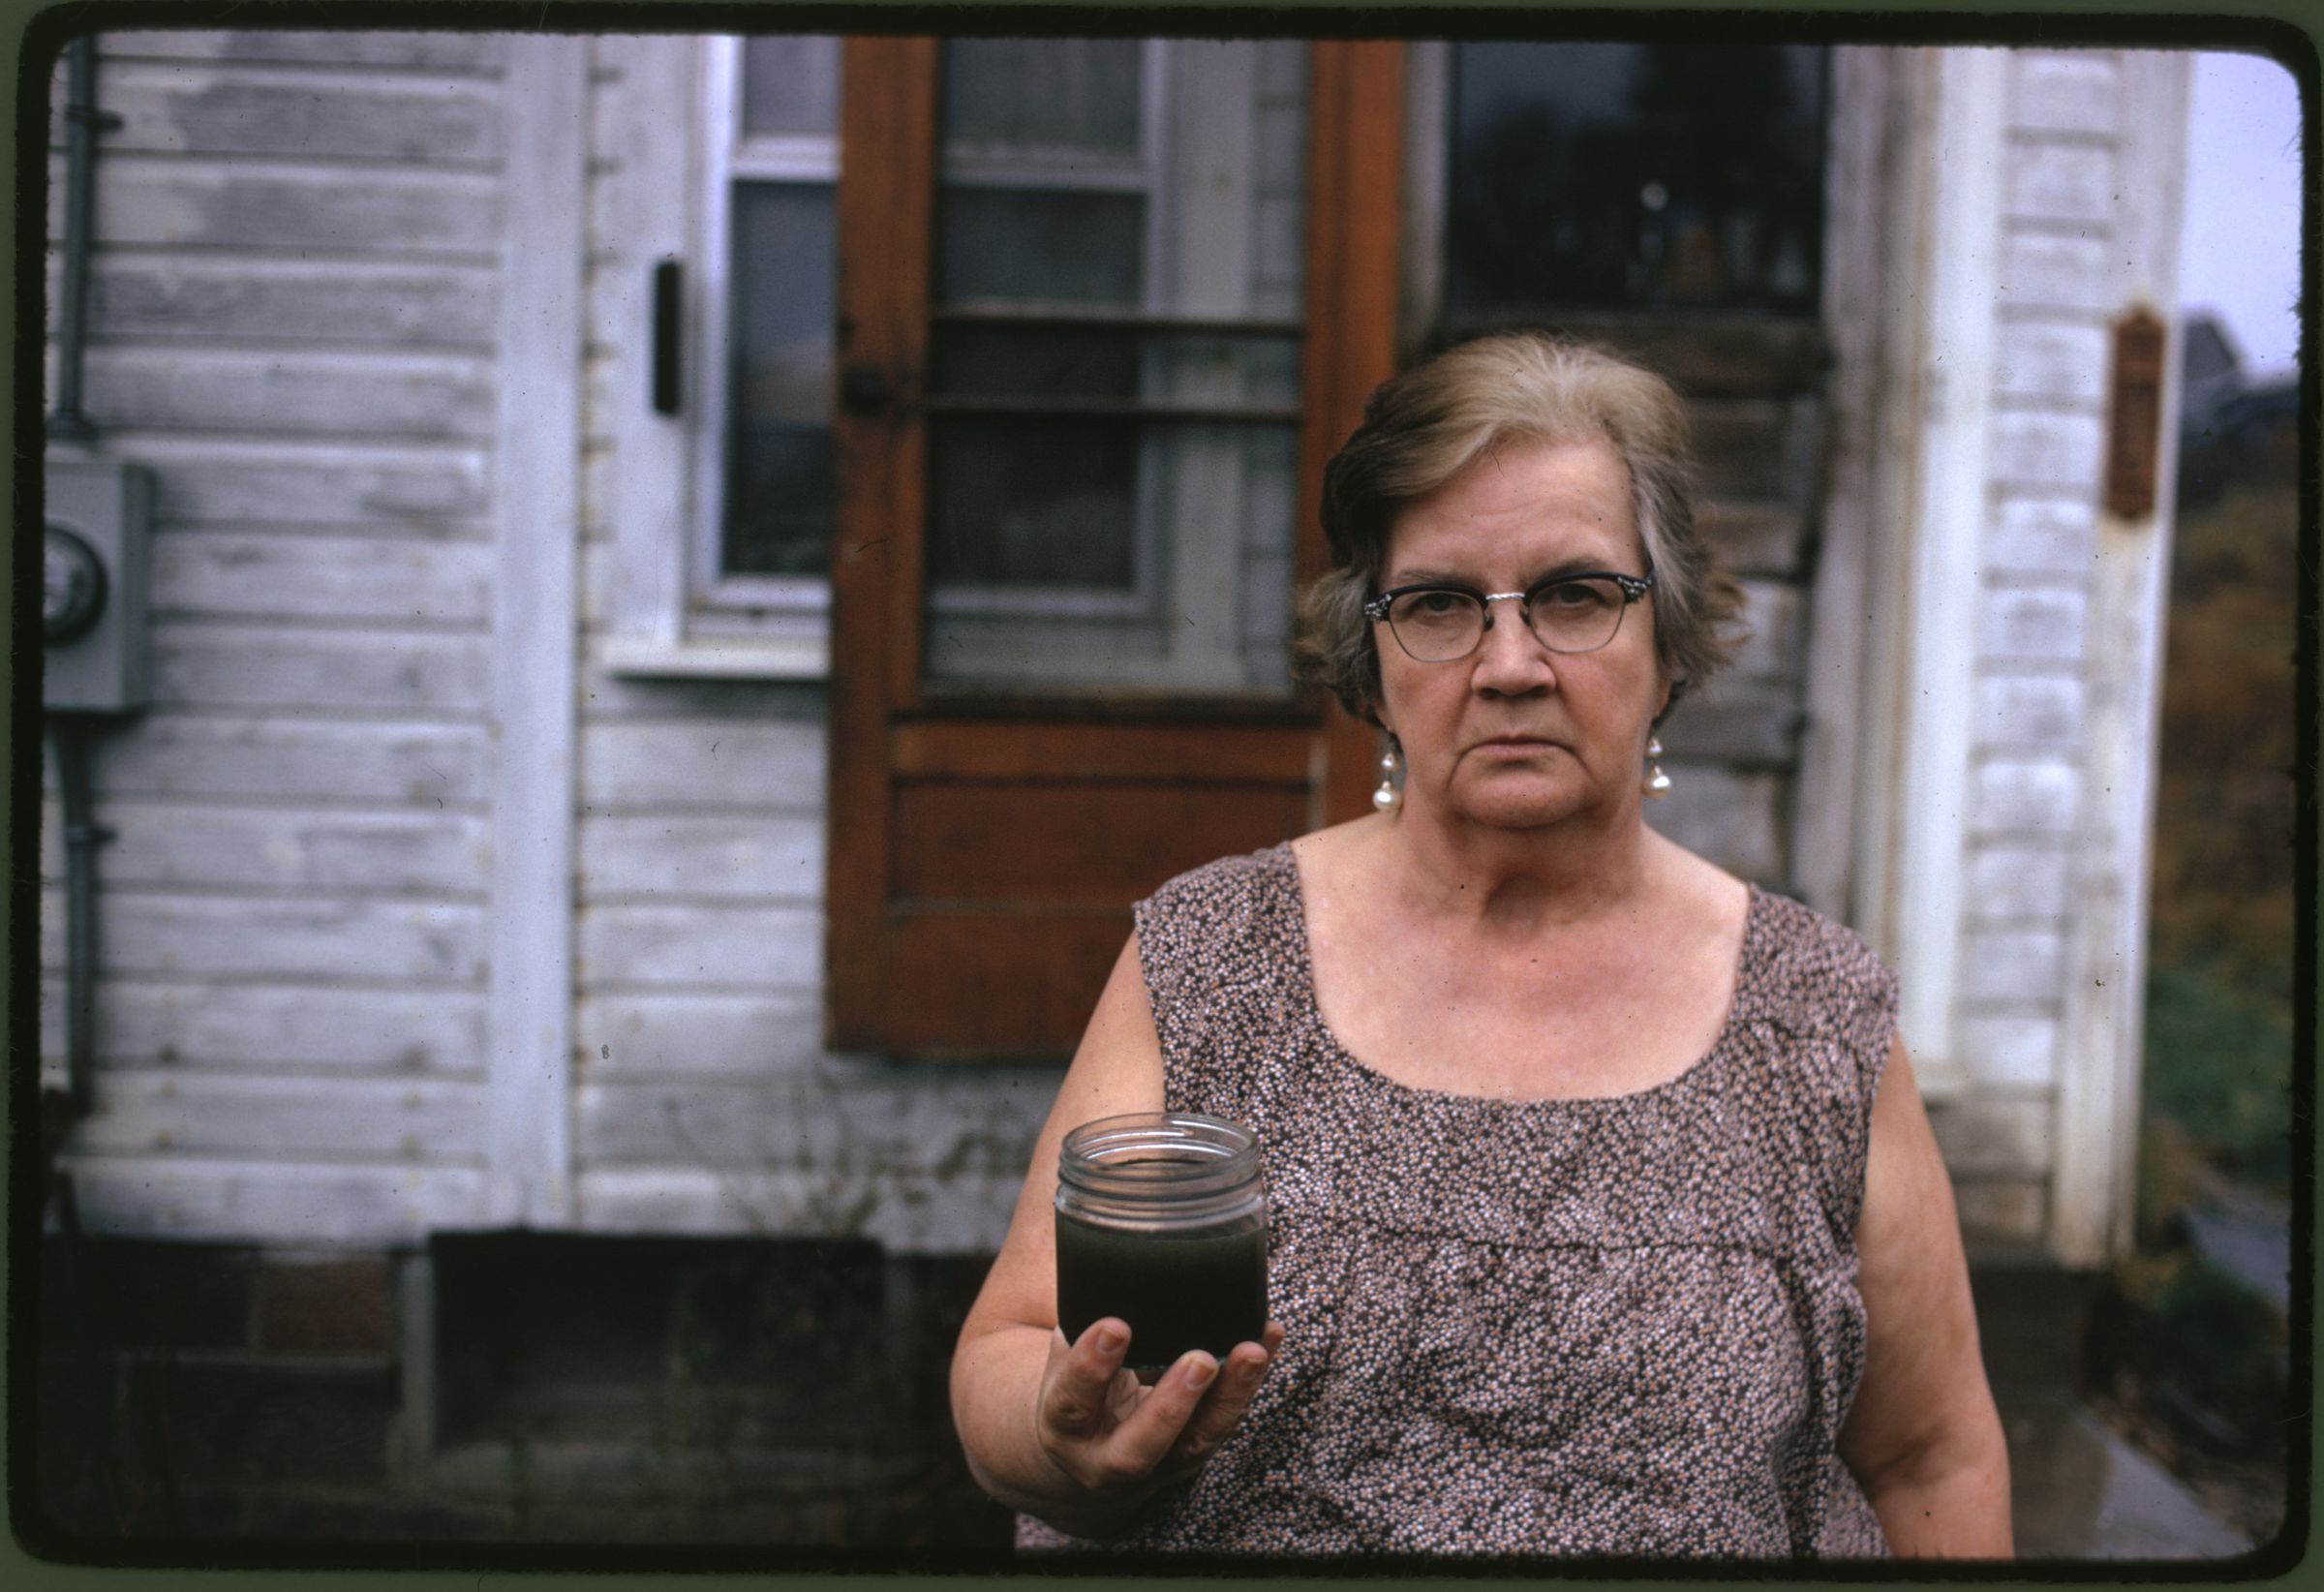 A woman holds a jar of undrinkable water from her well in Ohio in 1973. She filed a damage suit against the Hanna Coal Company, which owned the land around her house.